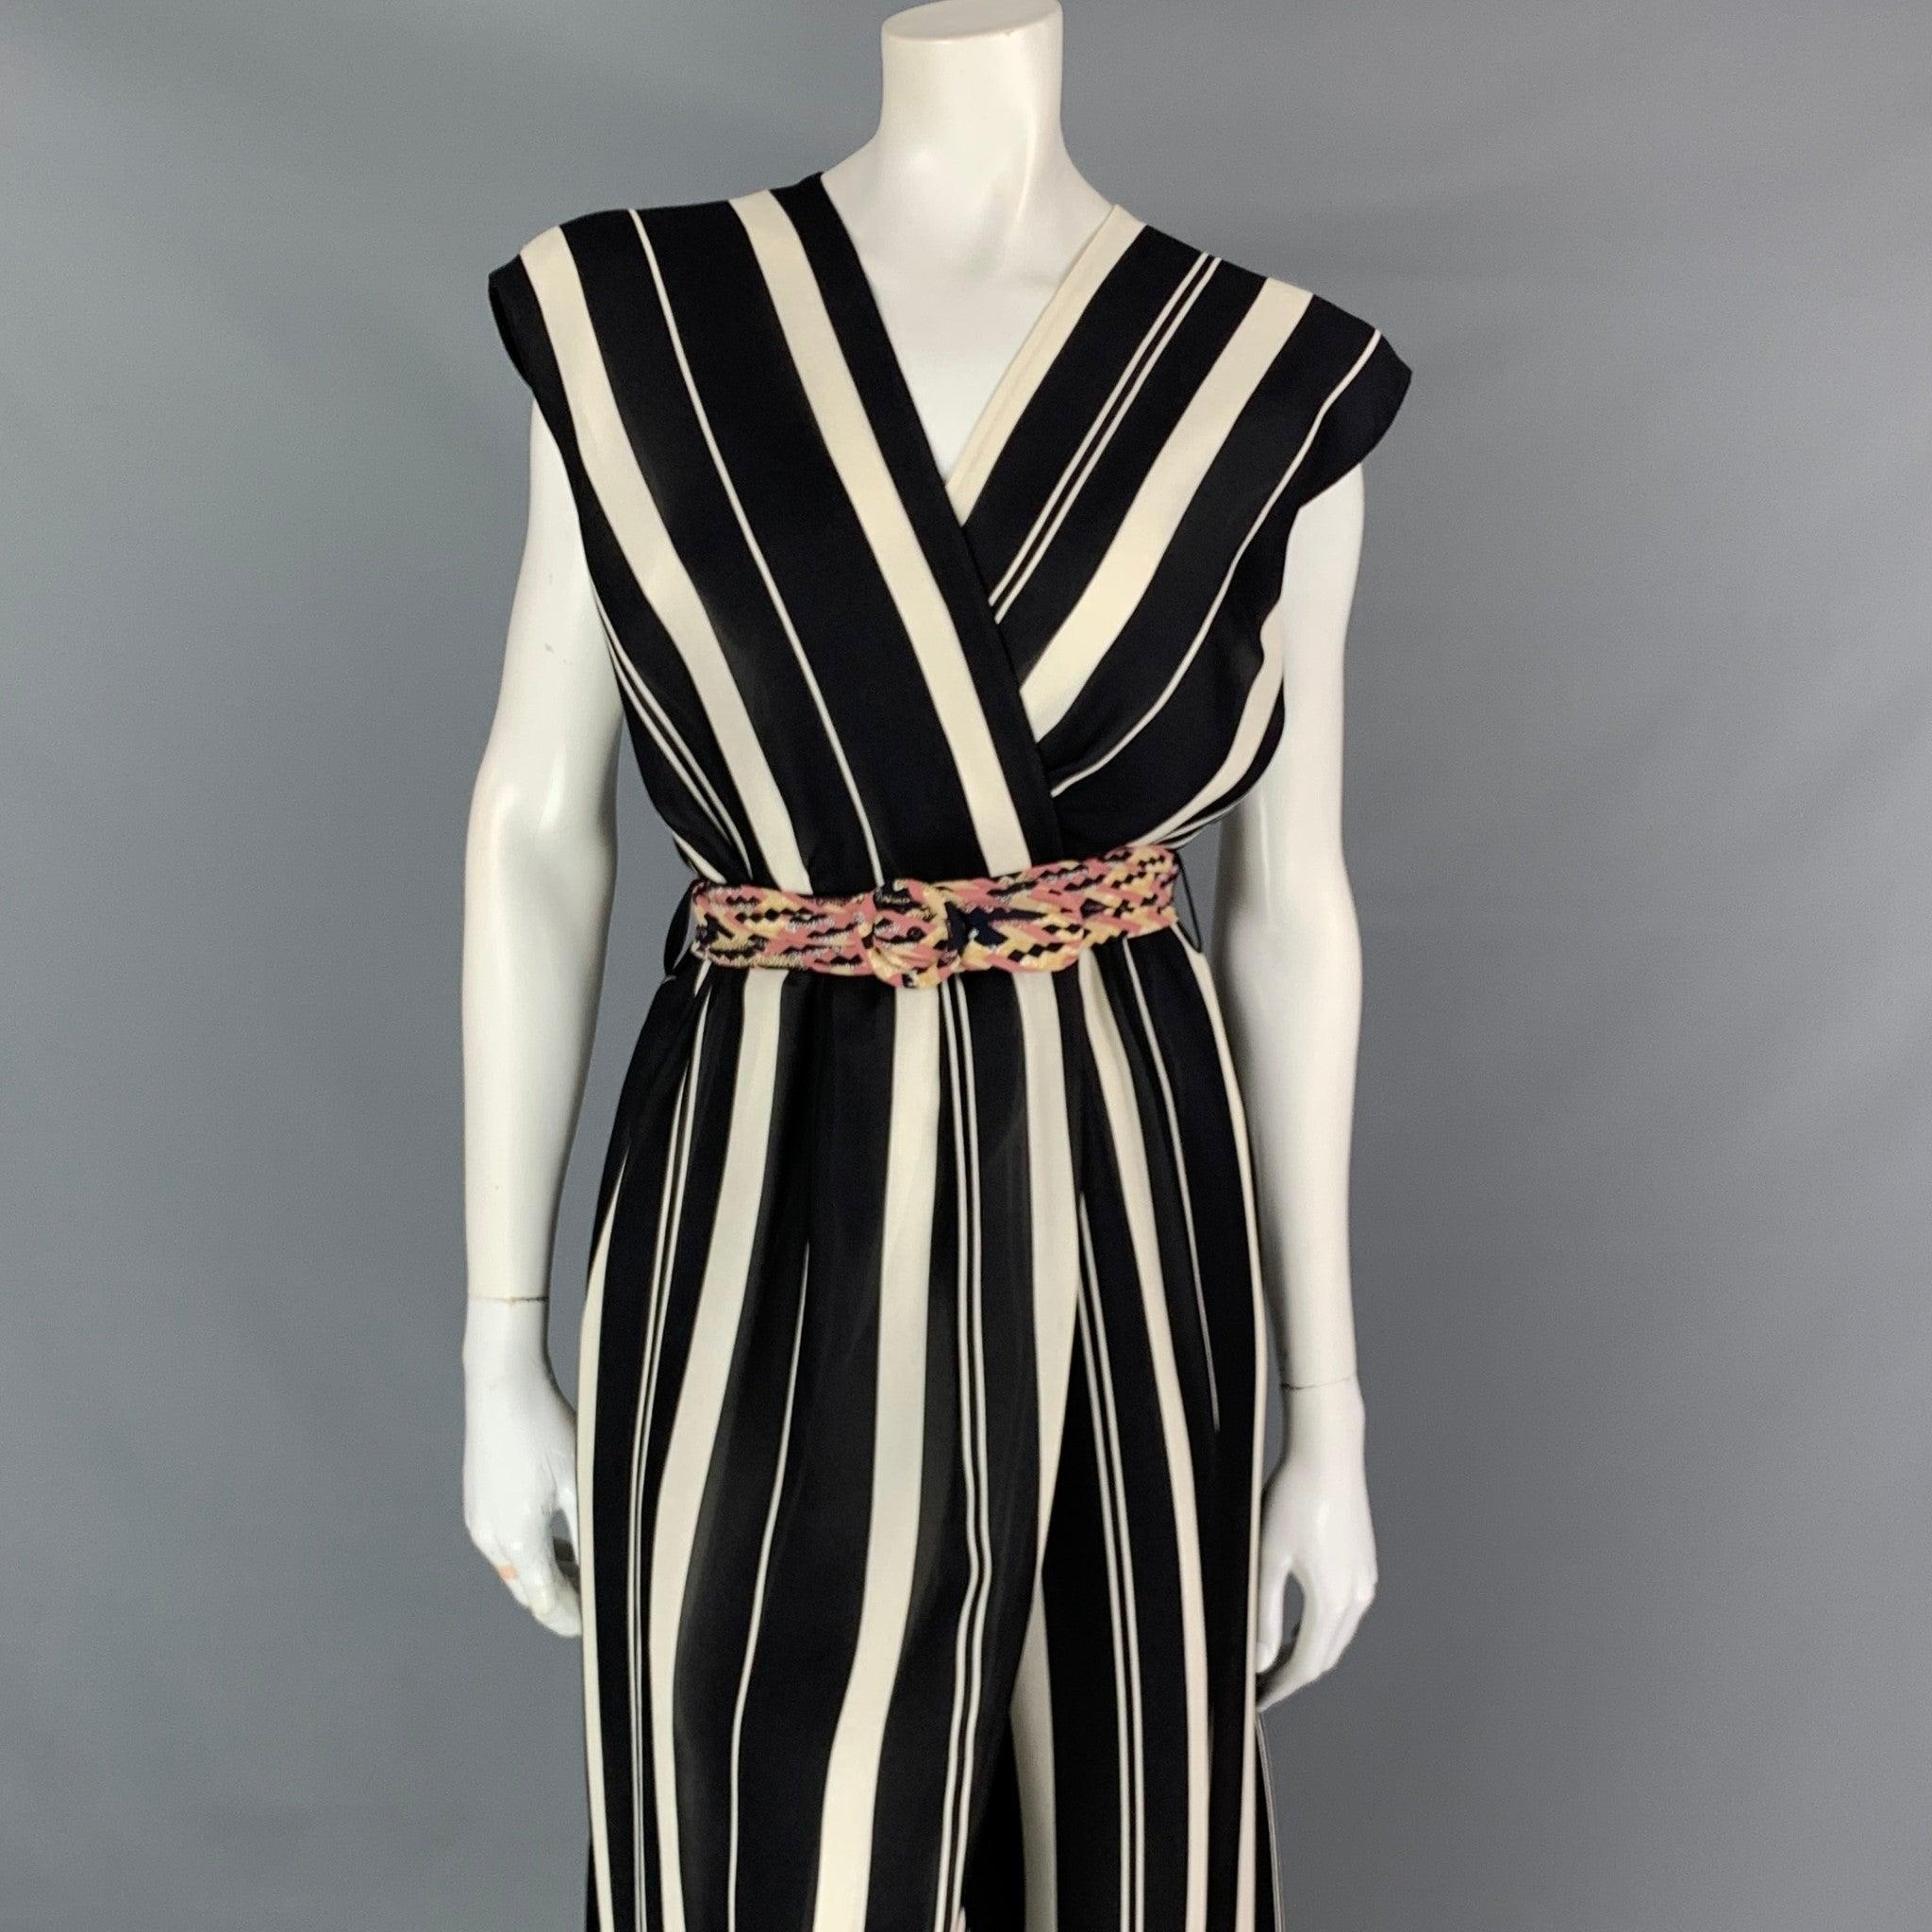 LOUIS VUITTON sleeveless wrap dress with a plunging neckline and tulip skirt, in striped gazar and silk georgette. A dash of geometric transparency and a runway-inspired fabric belt with round buckle make this an effortlessly elegant look for day or